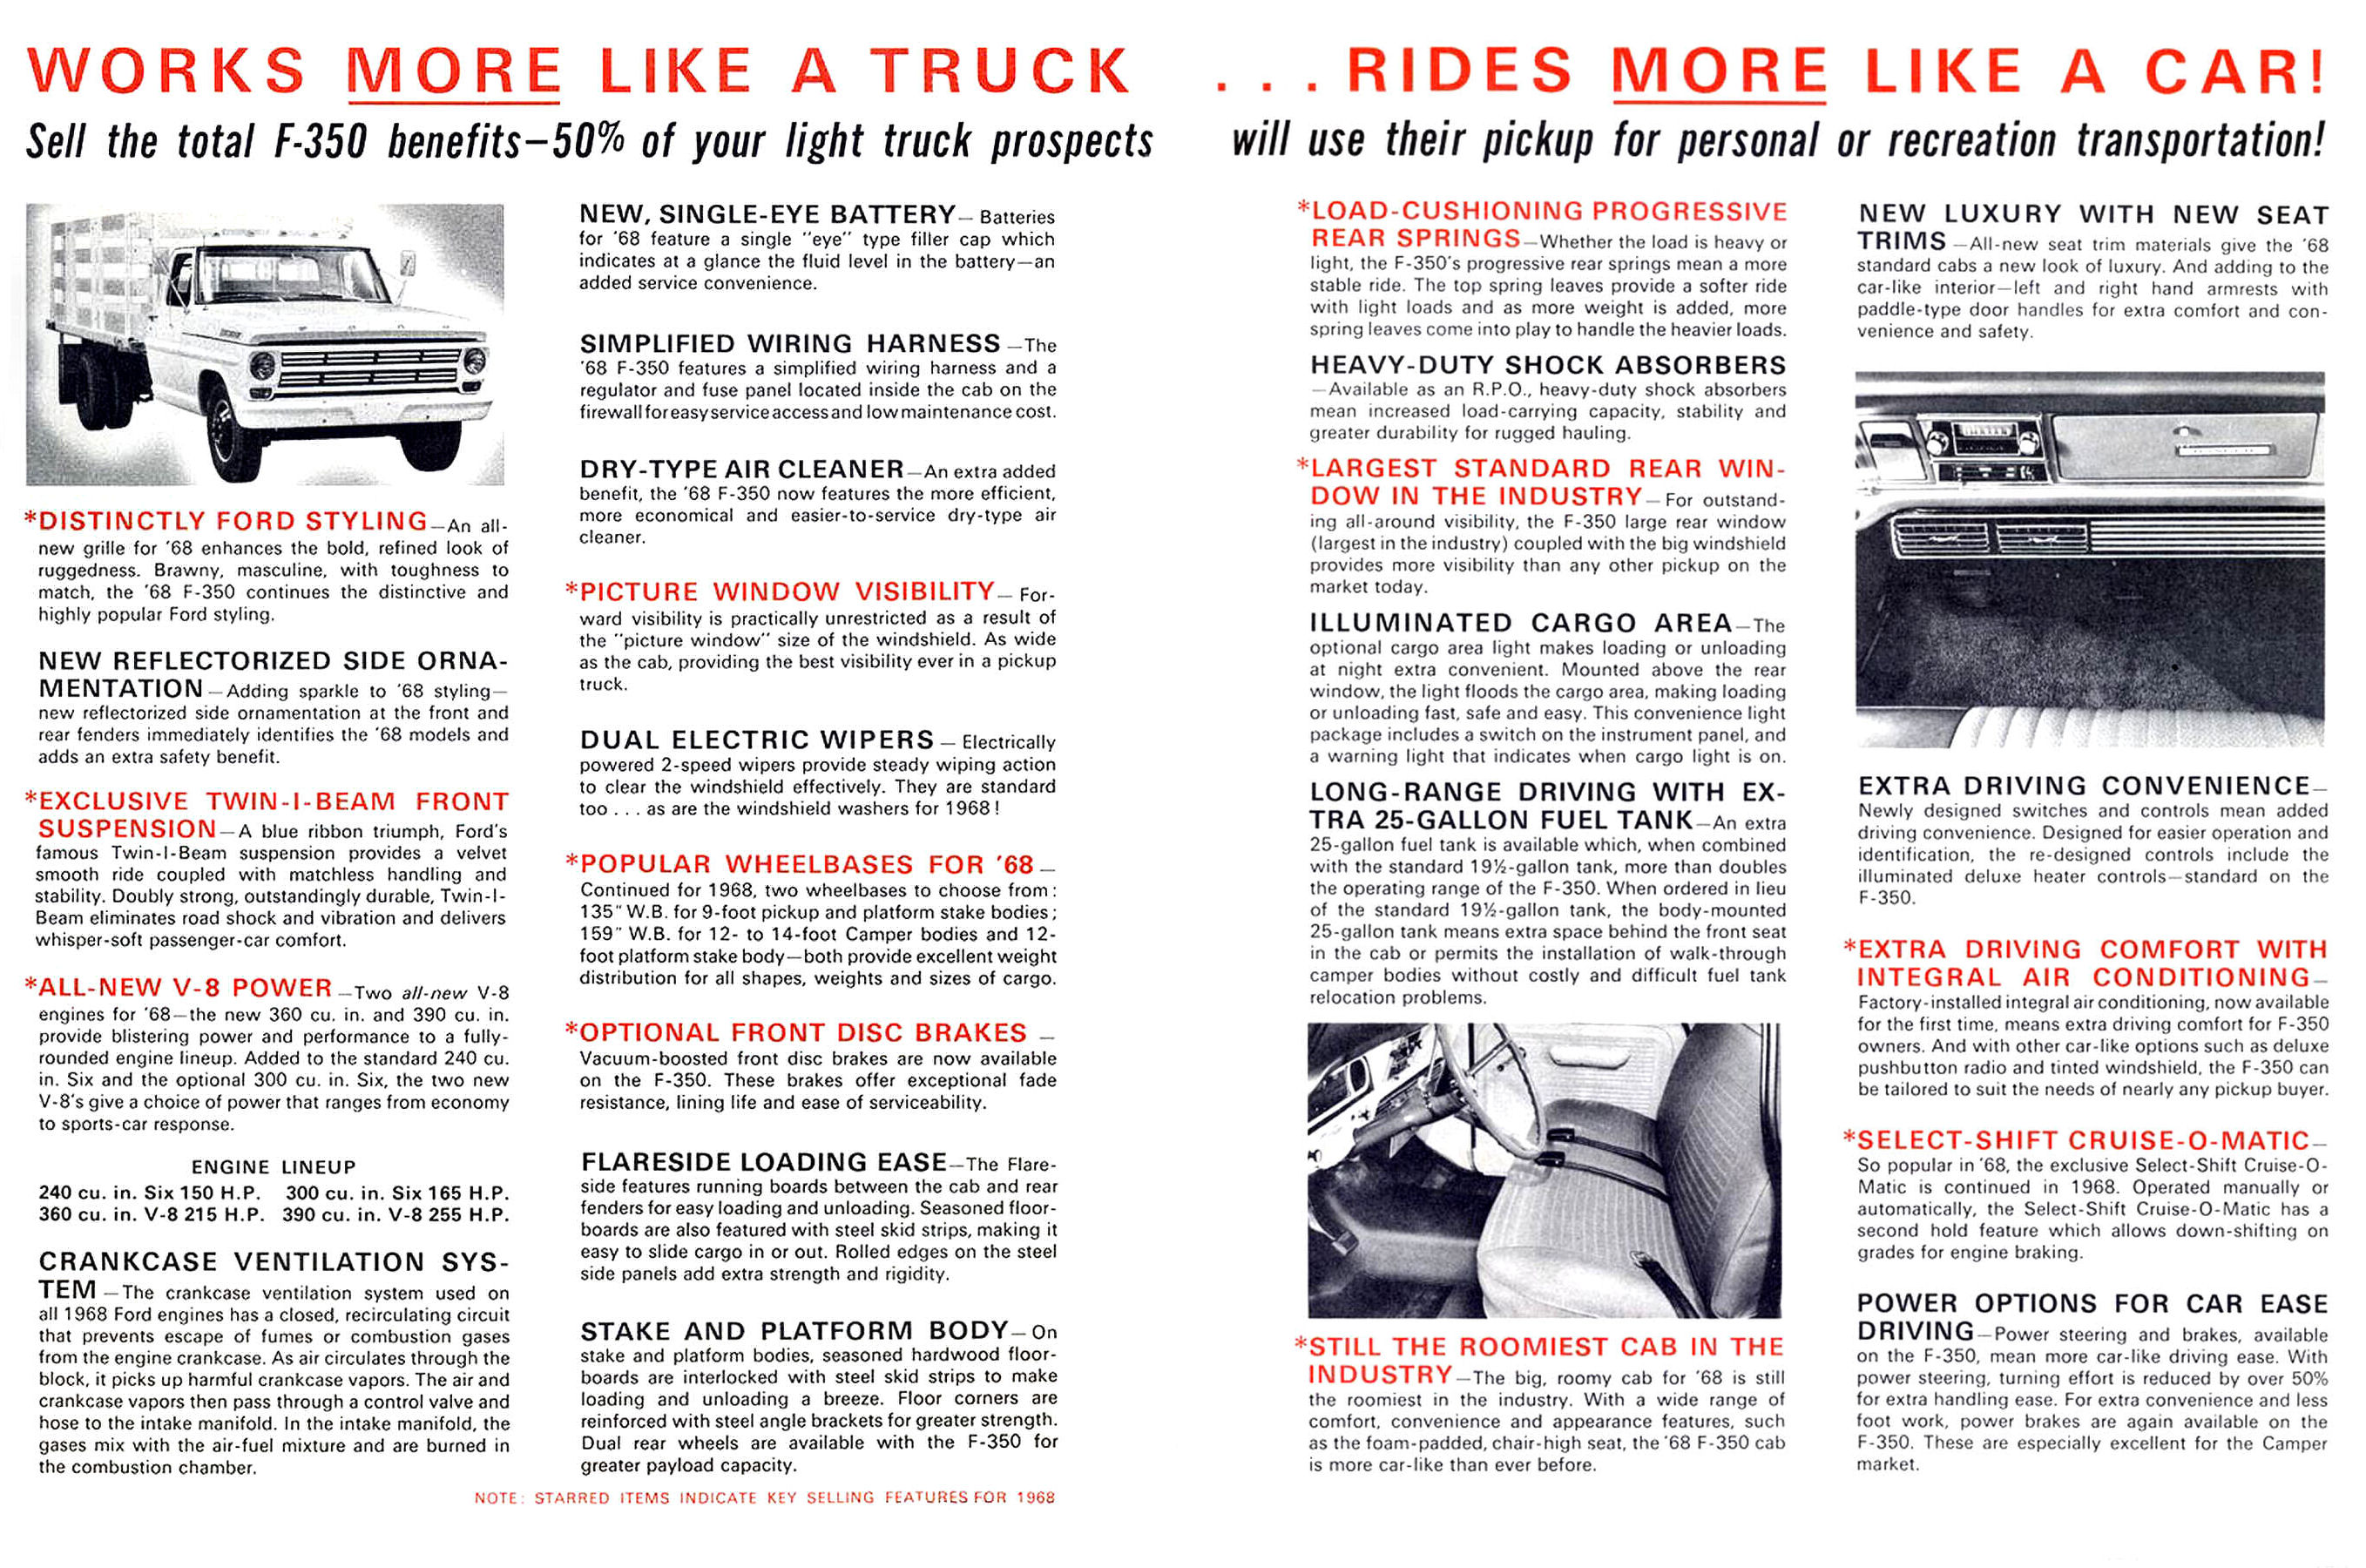 1968 Ford F-350 Sales Features-02-03